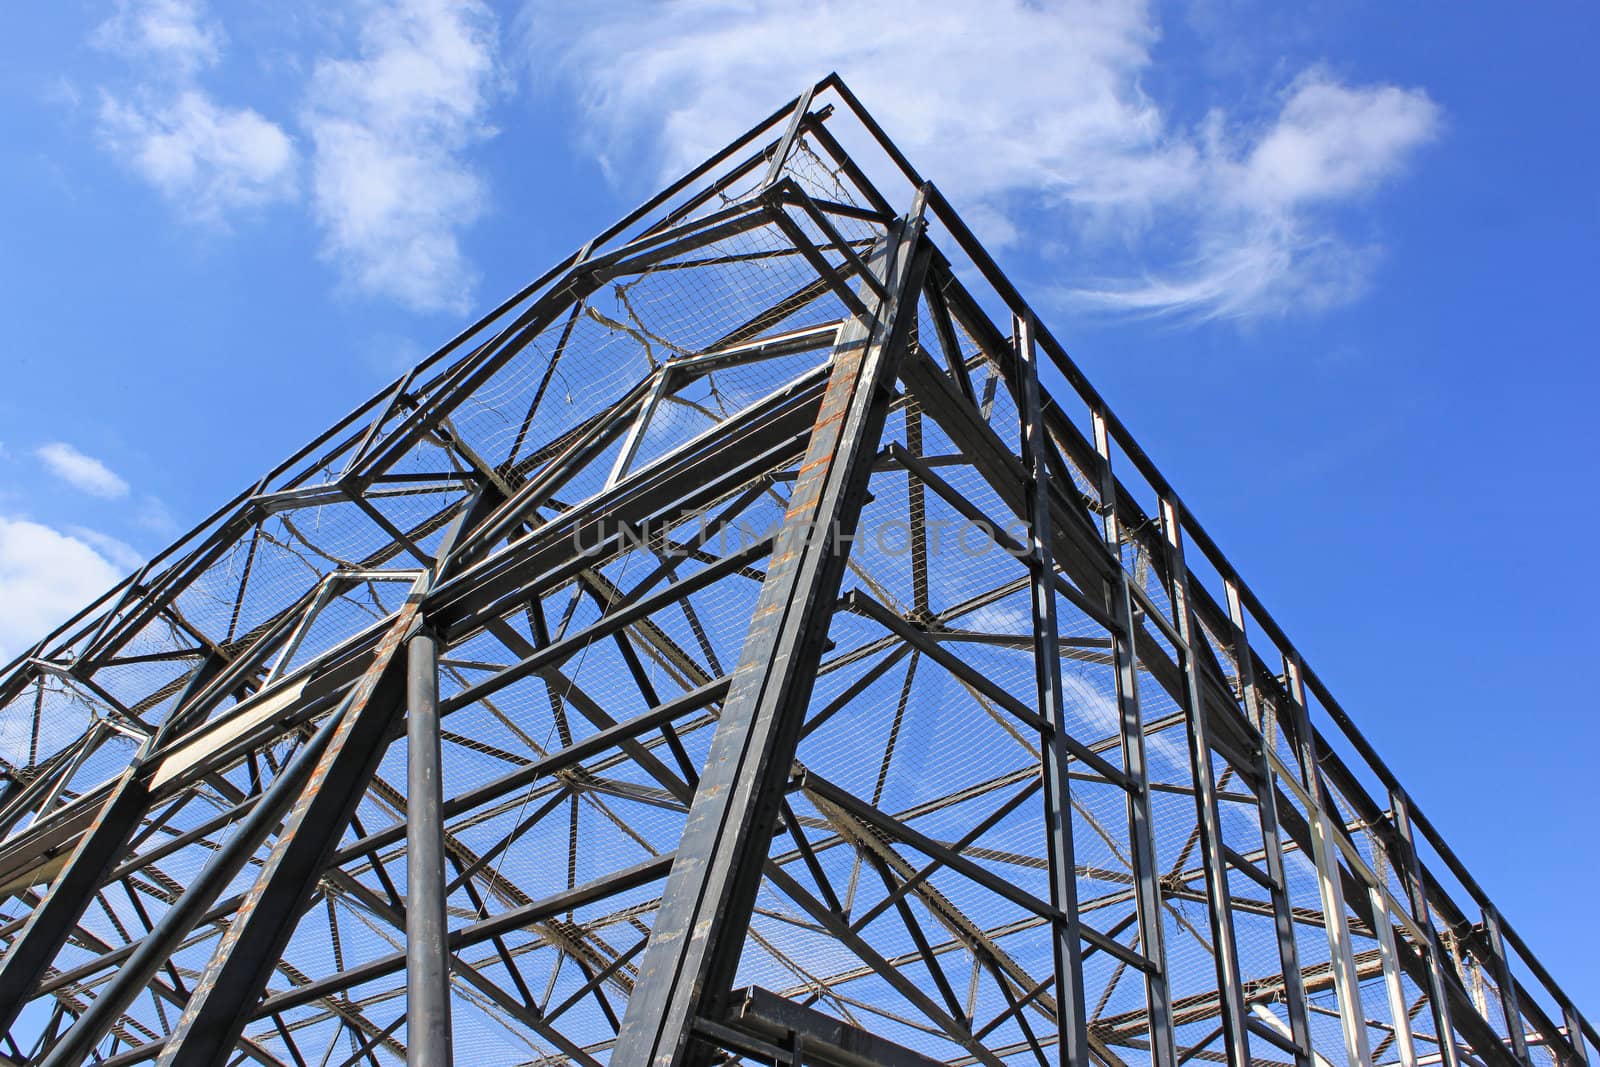 a metal frame with safety net against a background of blue sky with clouds